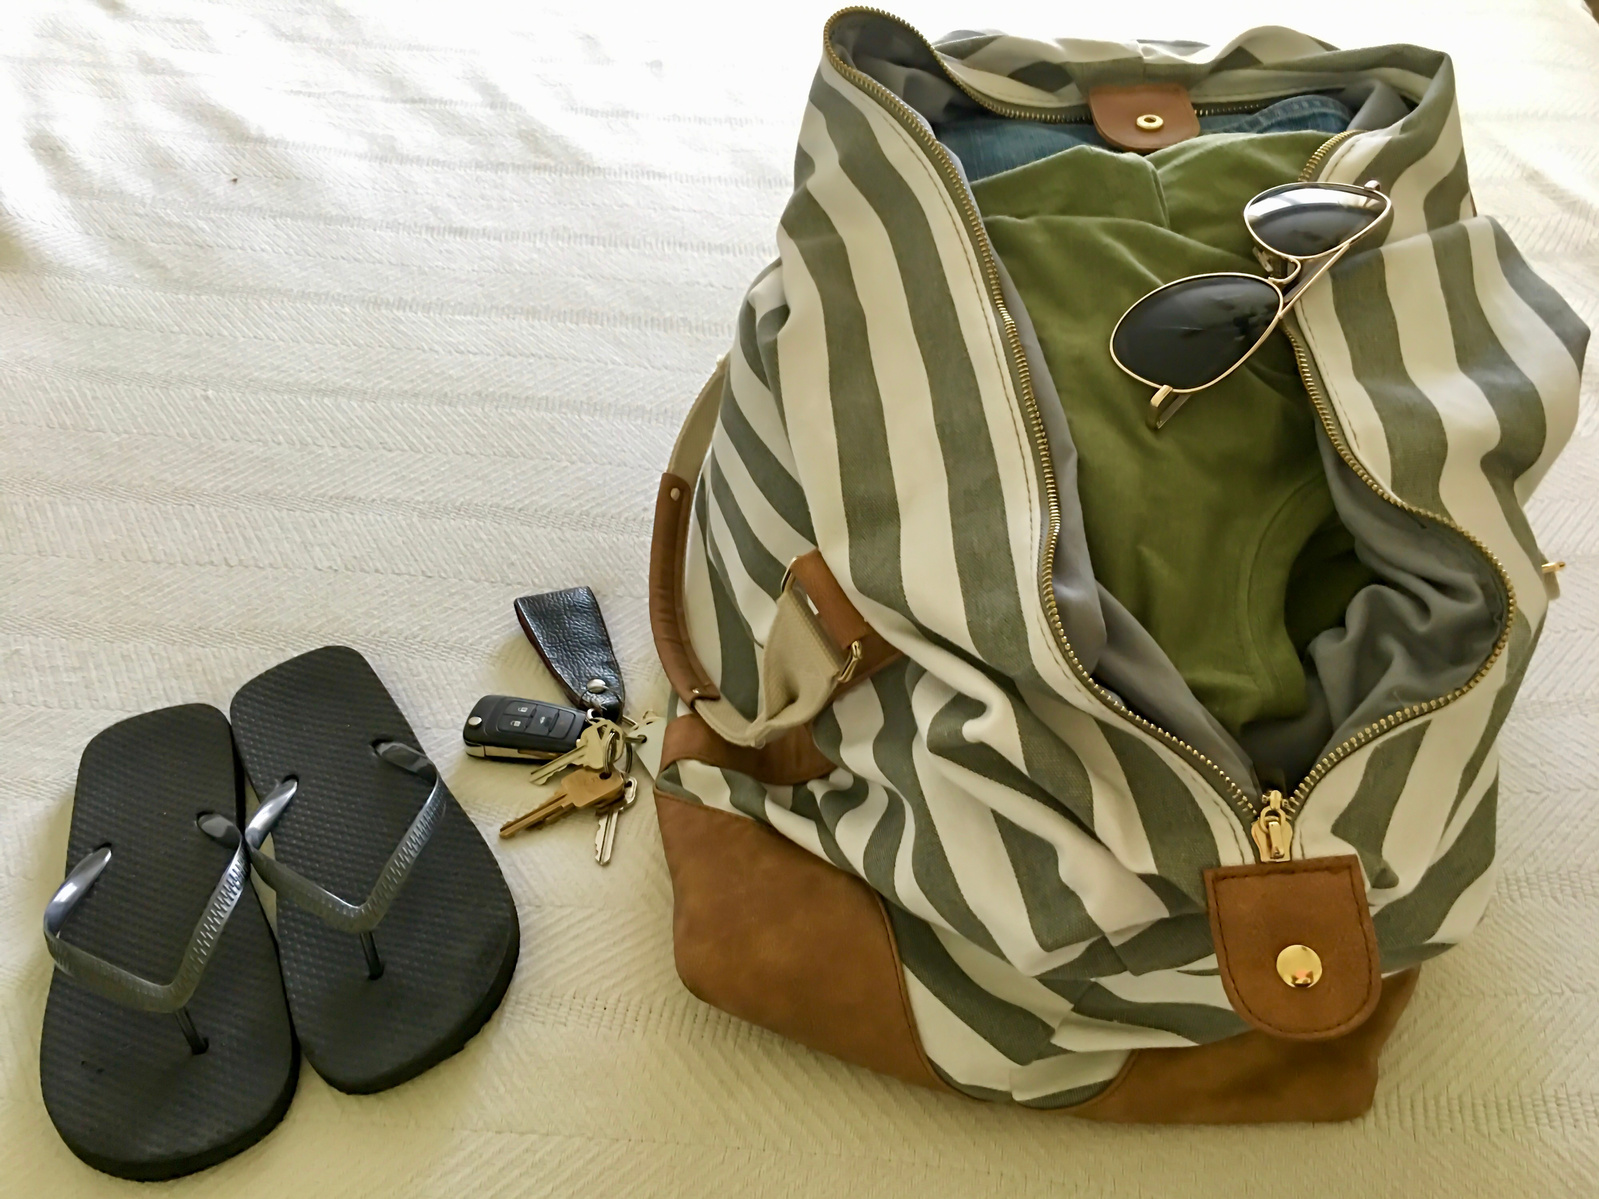 A duffle bag, flips flops and sunglasses in preparation for a road trip